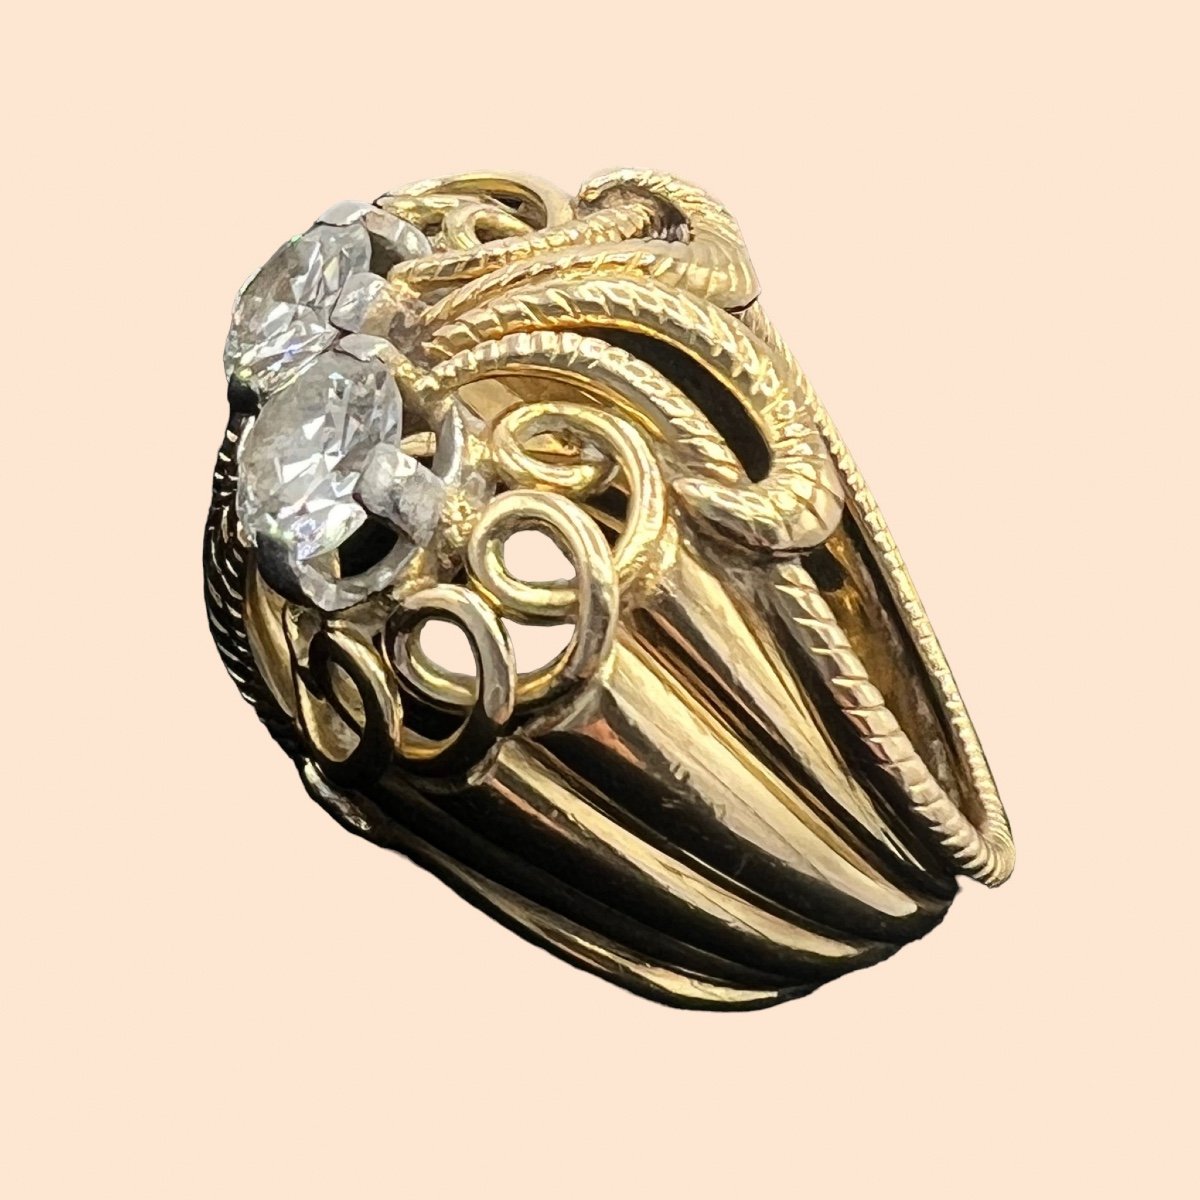 Superb Cocktail Ring From The 1950s In 18 Carat Gold, Set With Two Modern Cut Diamonds,-photo-3